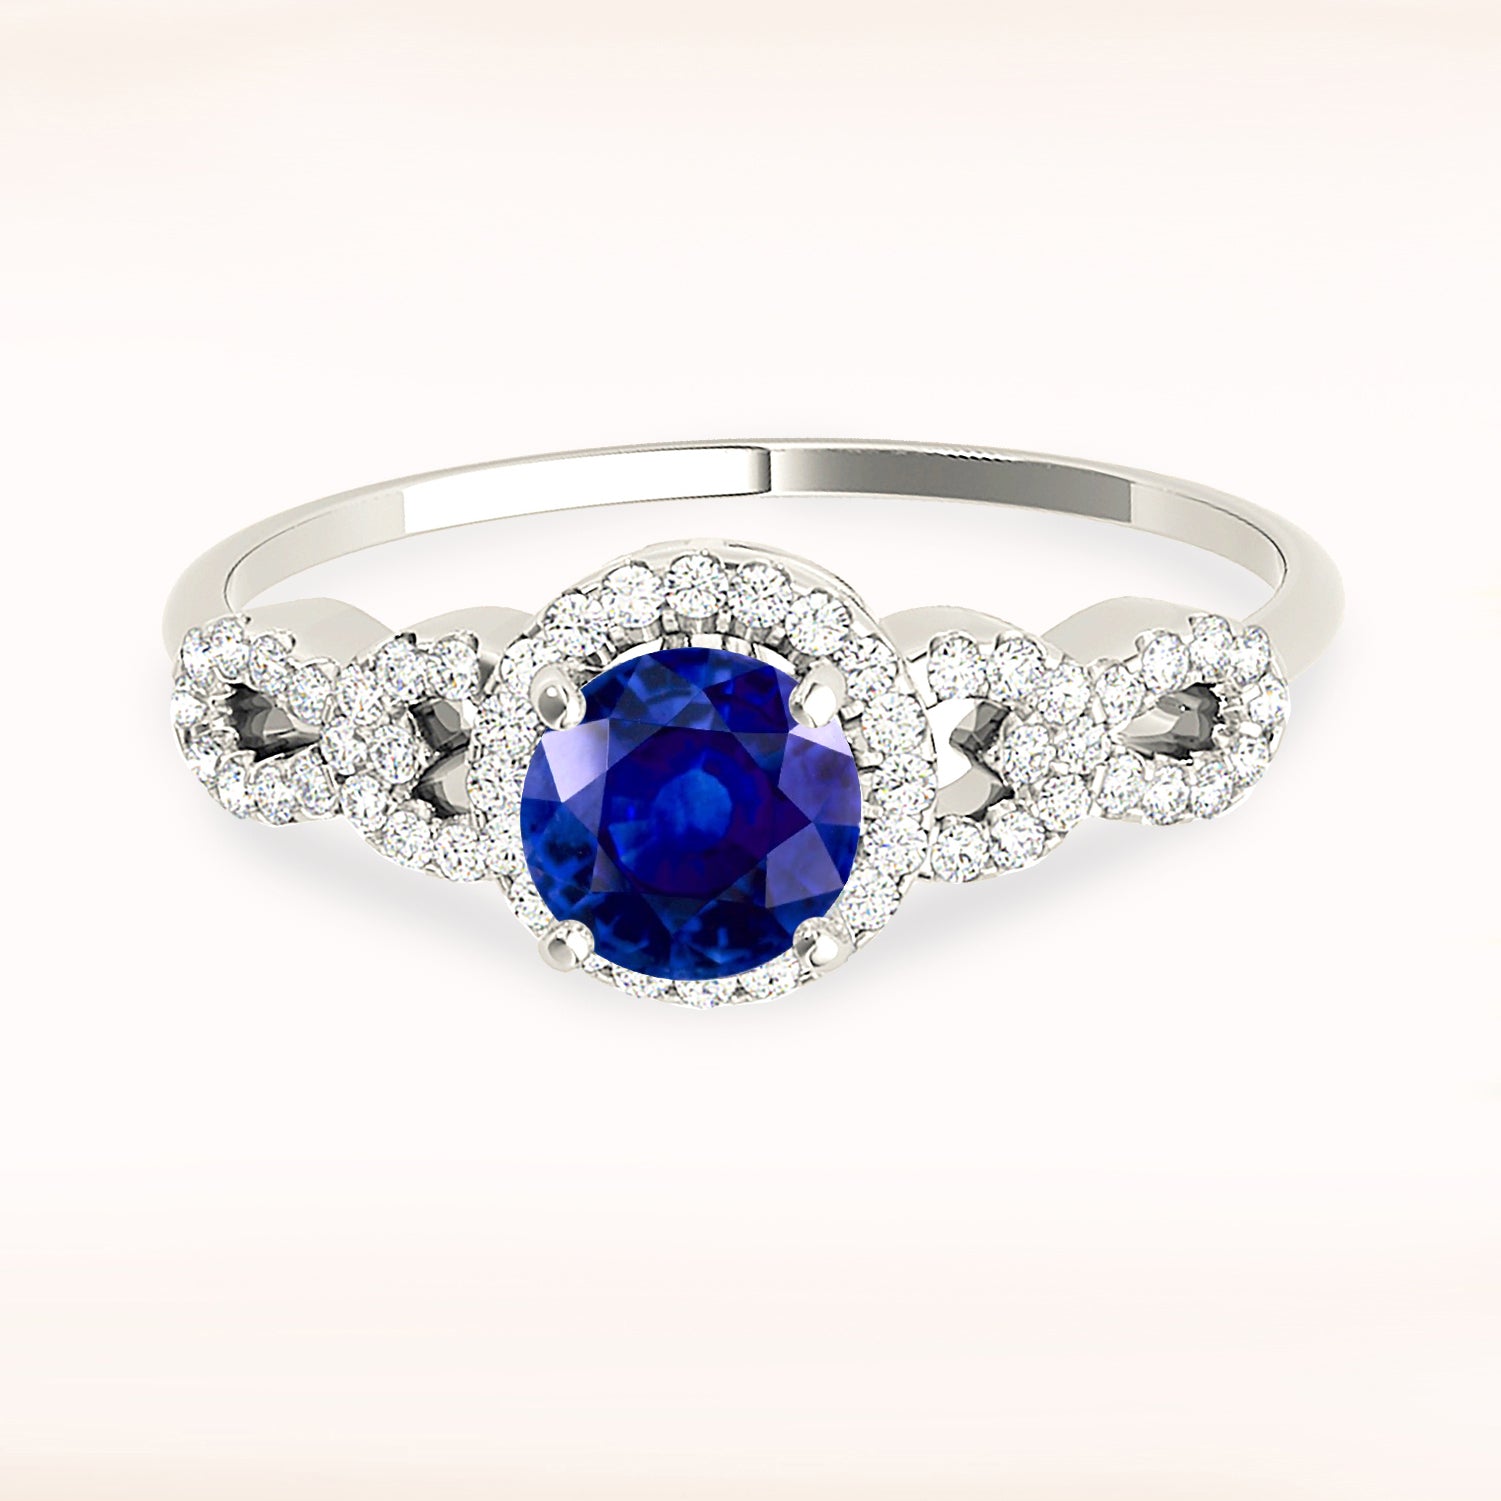 1.35 ct. Genuine Blue Sapphire Ring With 0.25 ctw. Diamond Halo, Open Rounded Diamond Band | Natural Sapphire And Diamond Gemstone Ring-in 14K/18K White, Yellow, Rose Gold and Platinum - Christmas Jewelry Gift -VIRABYANI